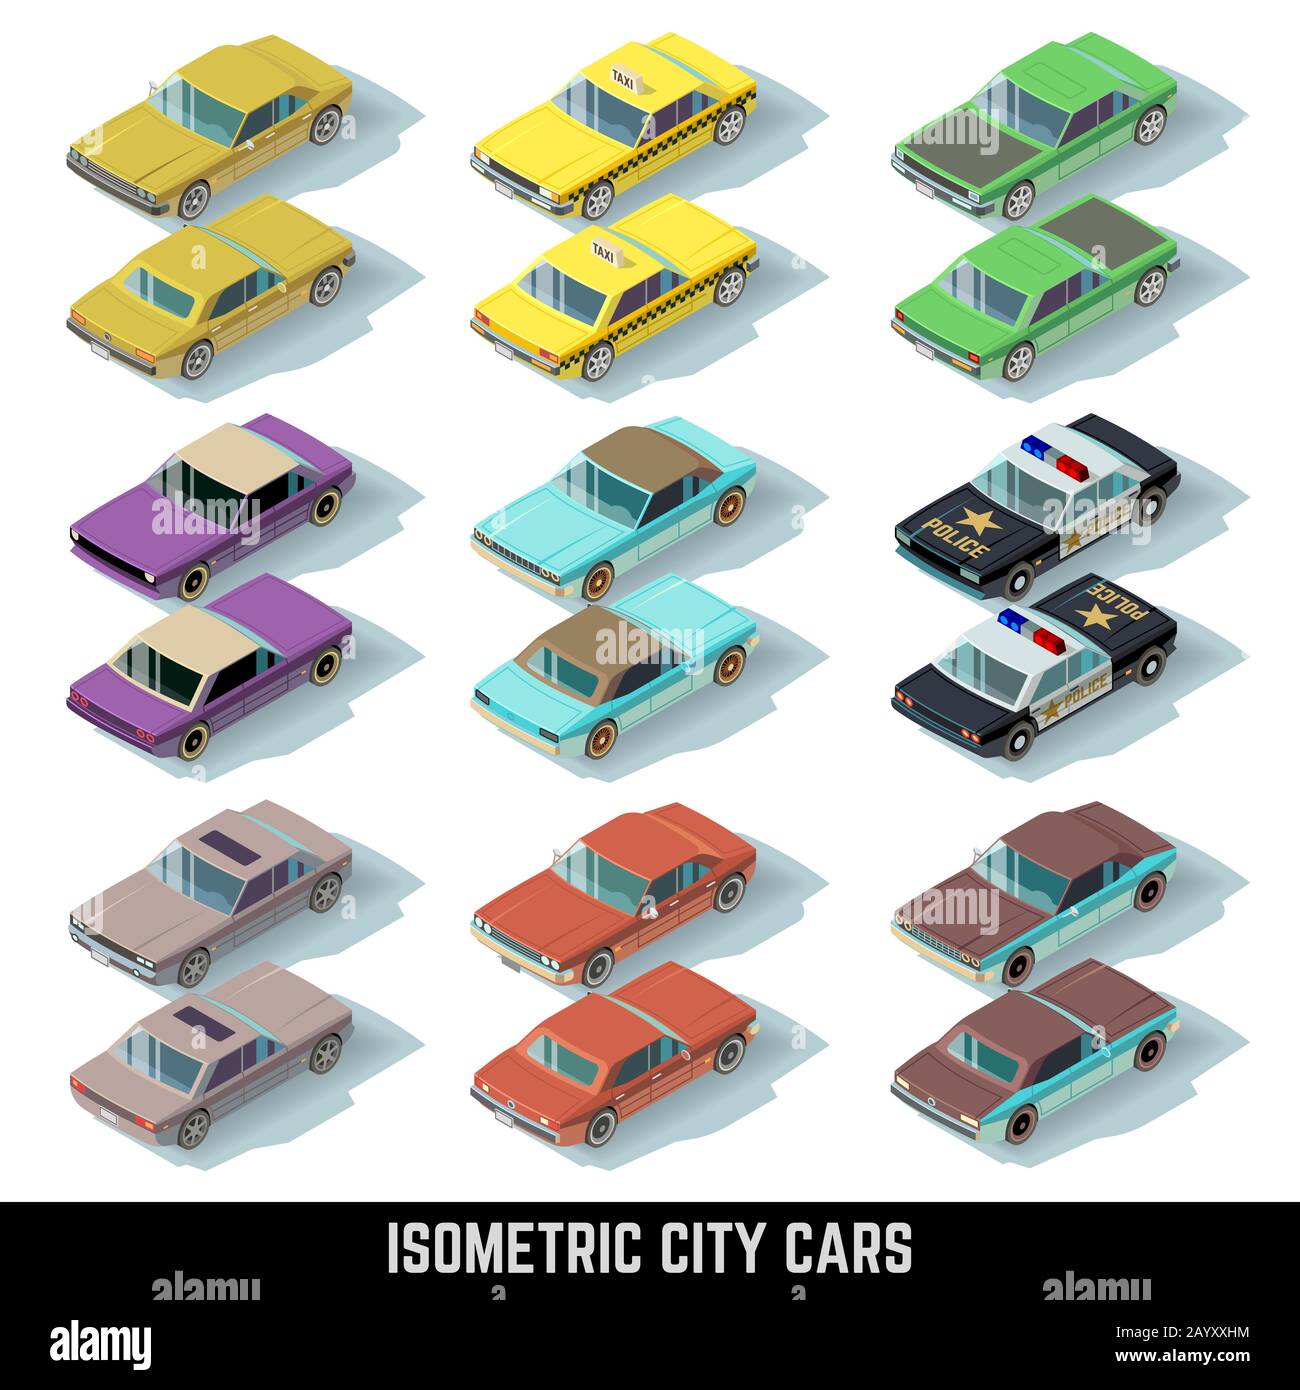 Isometric city cars vector icons in front and rear views. Isometric collection transport car. Police and taxi model car illustration Stock Vector